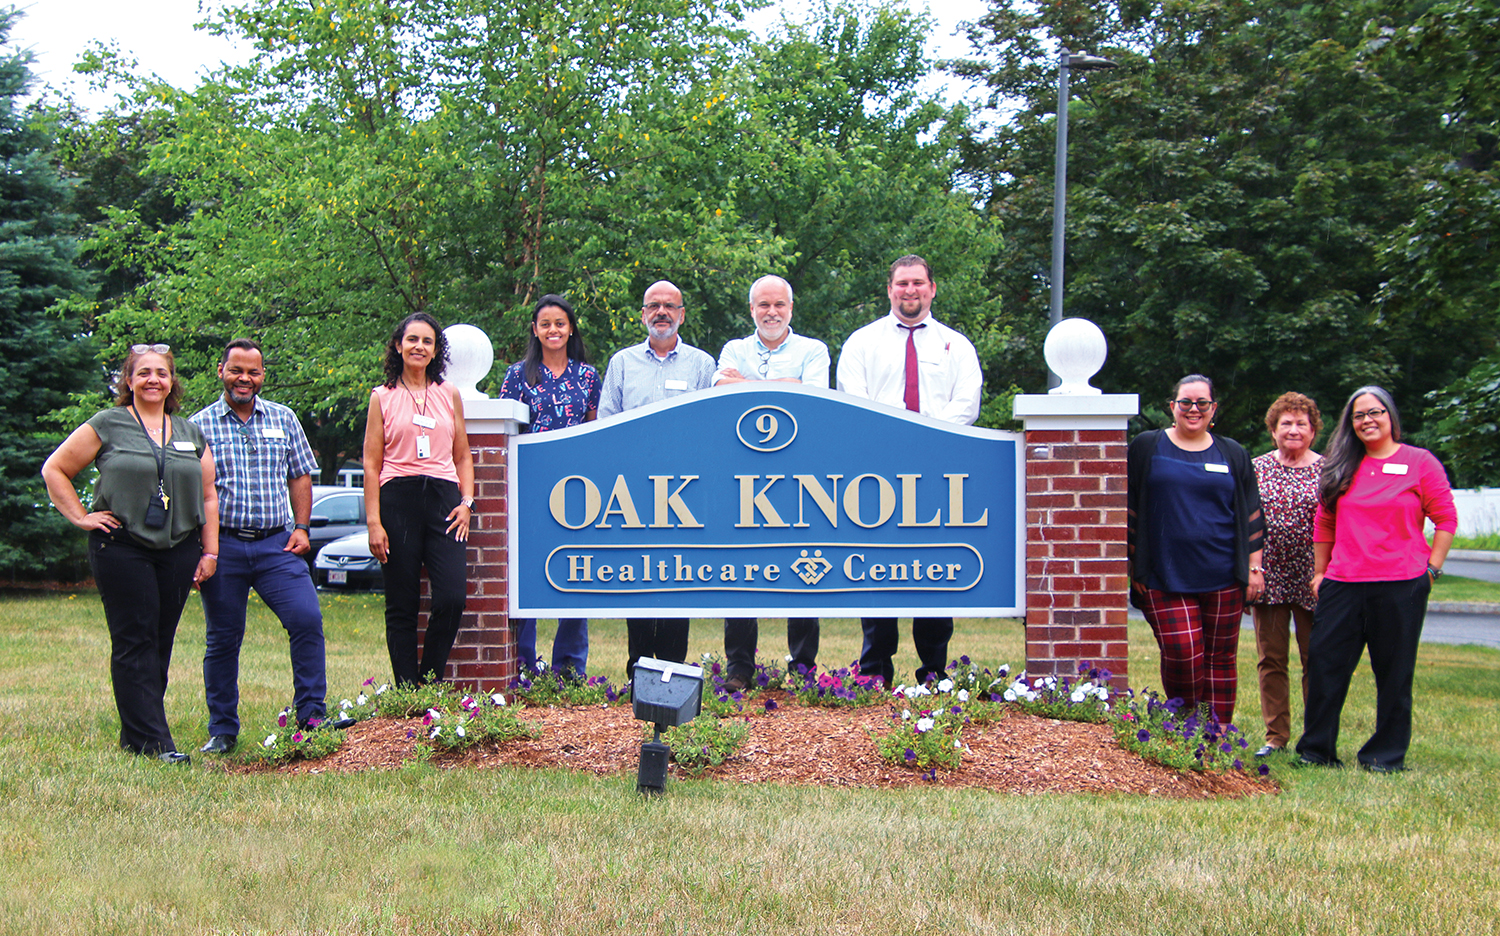 Oak Knoll Healthcare Center – proud to be JCAHO-accredited for another 3 years!